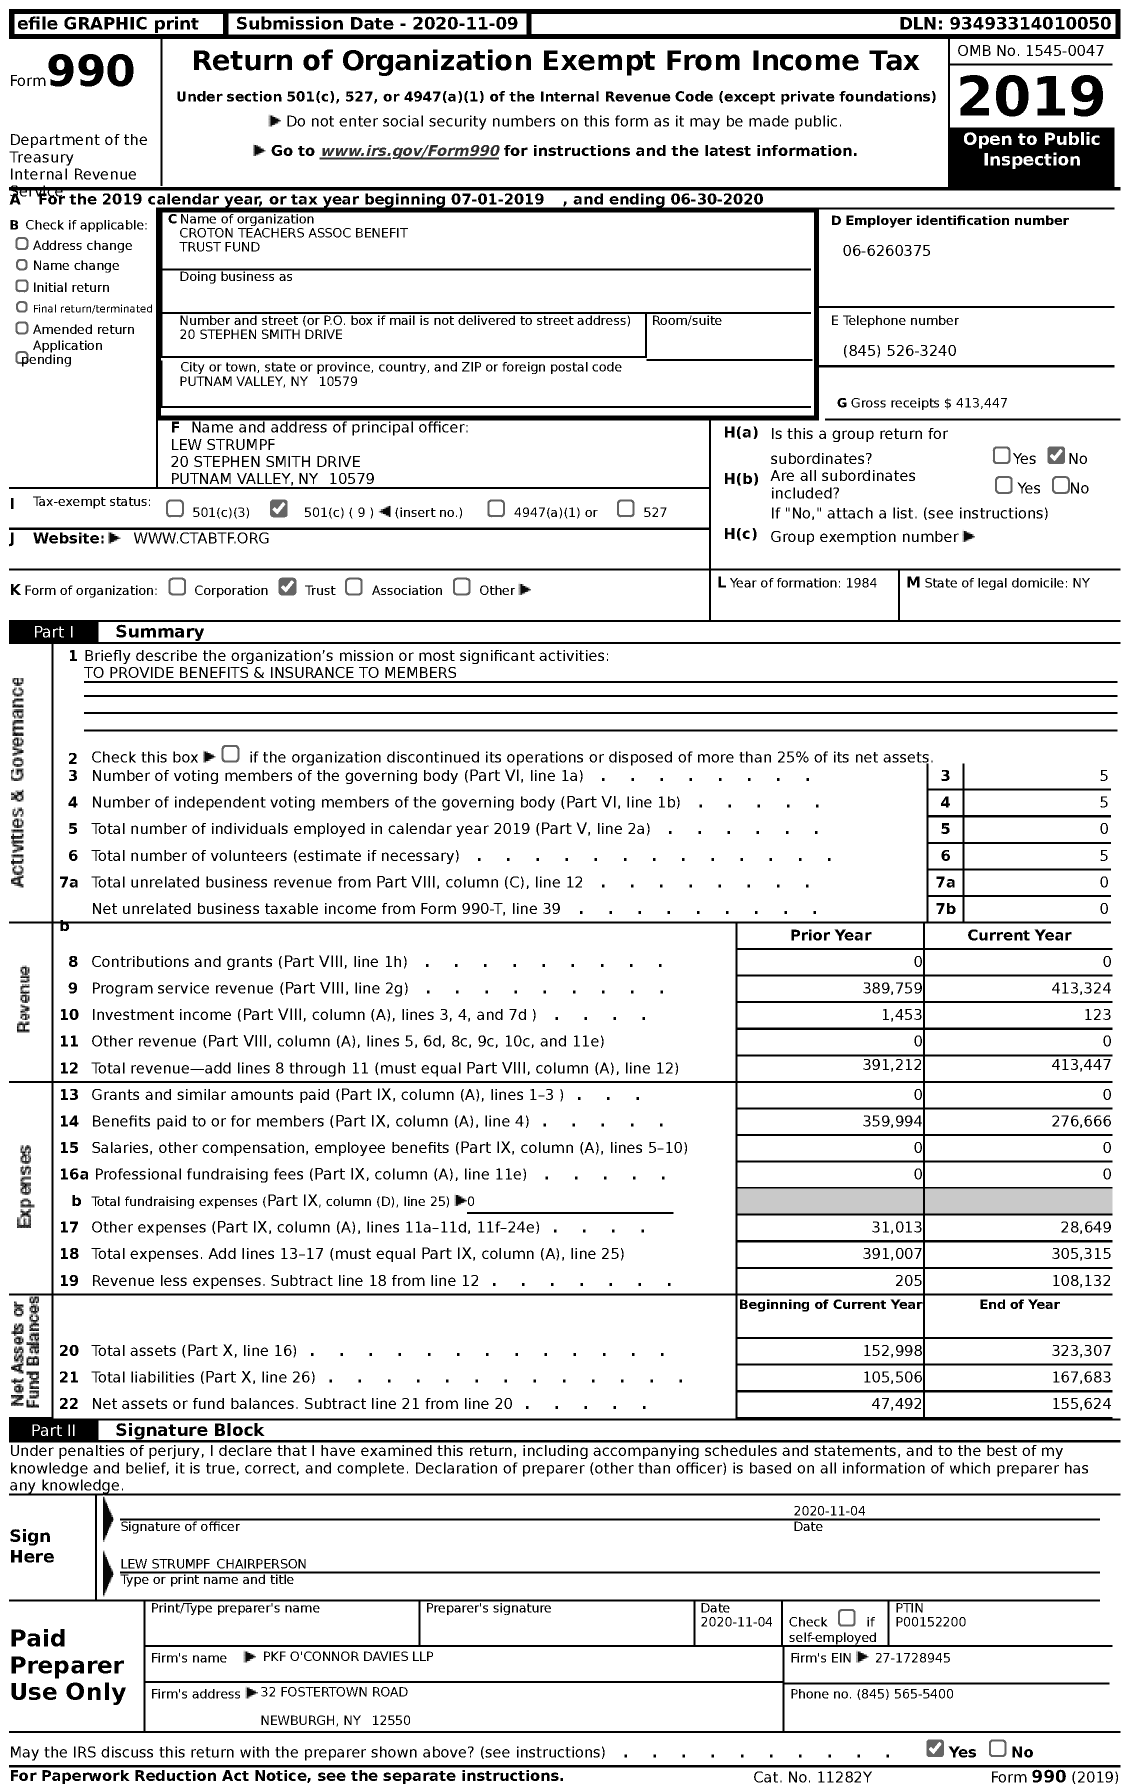 Image of first page of 2019 Form 990 for Croton Teachers Association Benefit Trust Fund